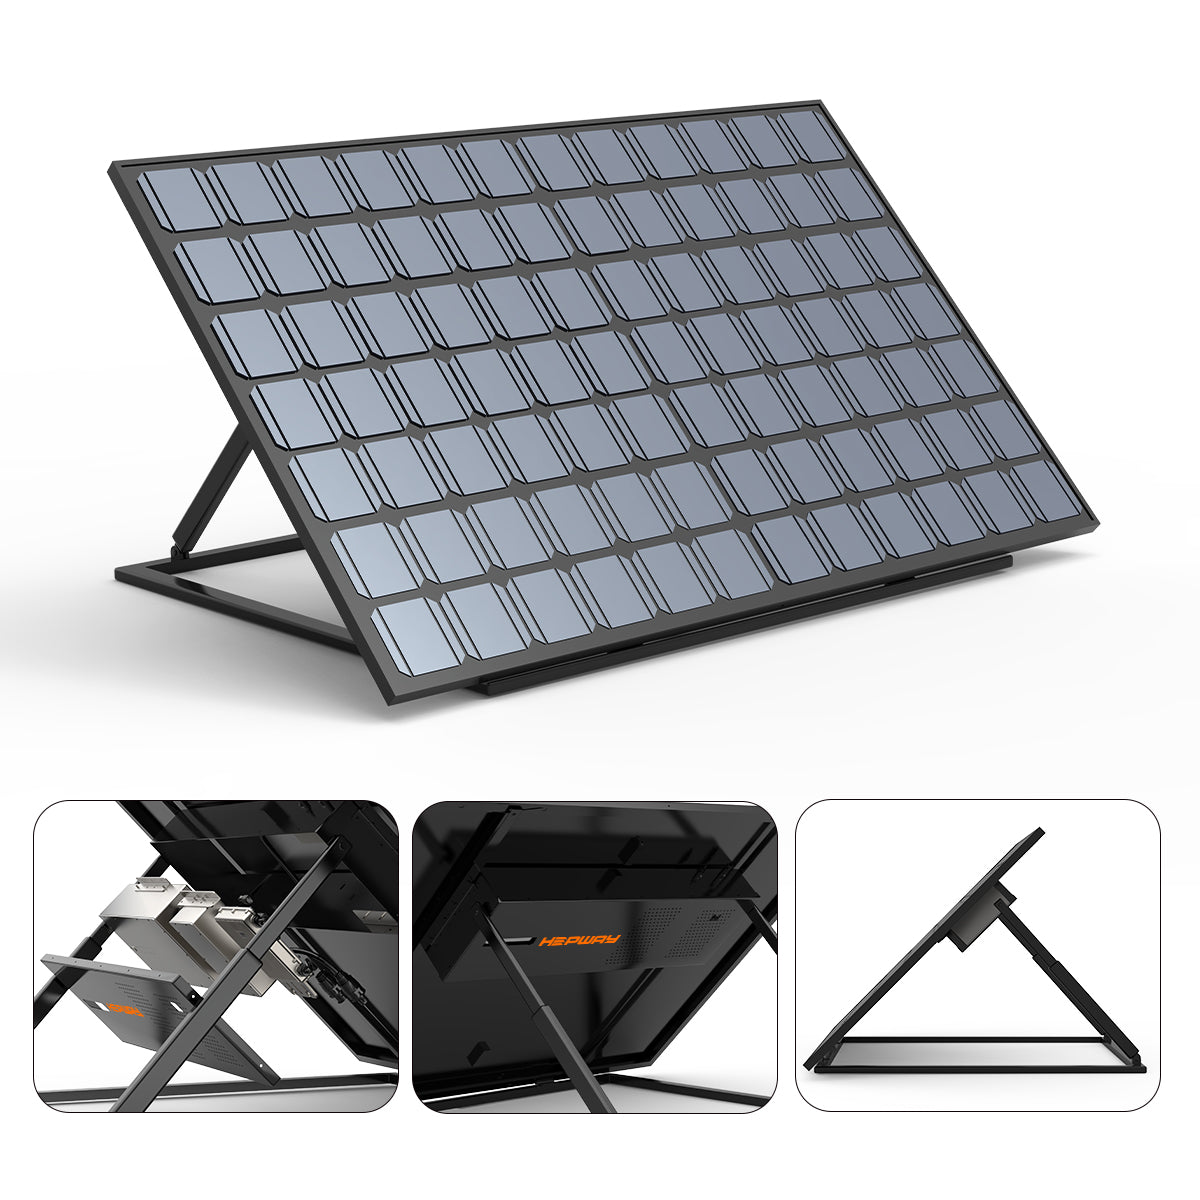 HEPWAY BPIS-1000 All-in-one Solar Storage System = Solar Panel 500W+ Battery 1000Wh + Microinverter 600W